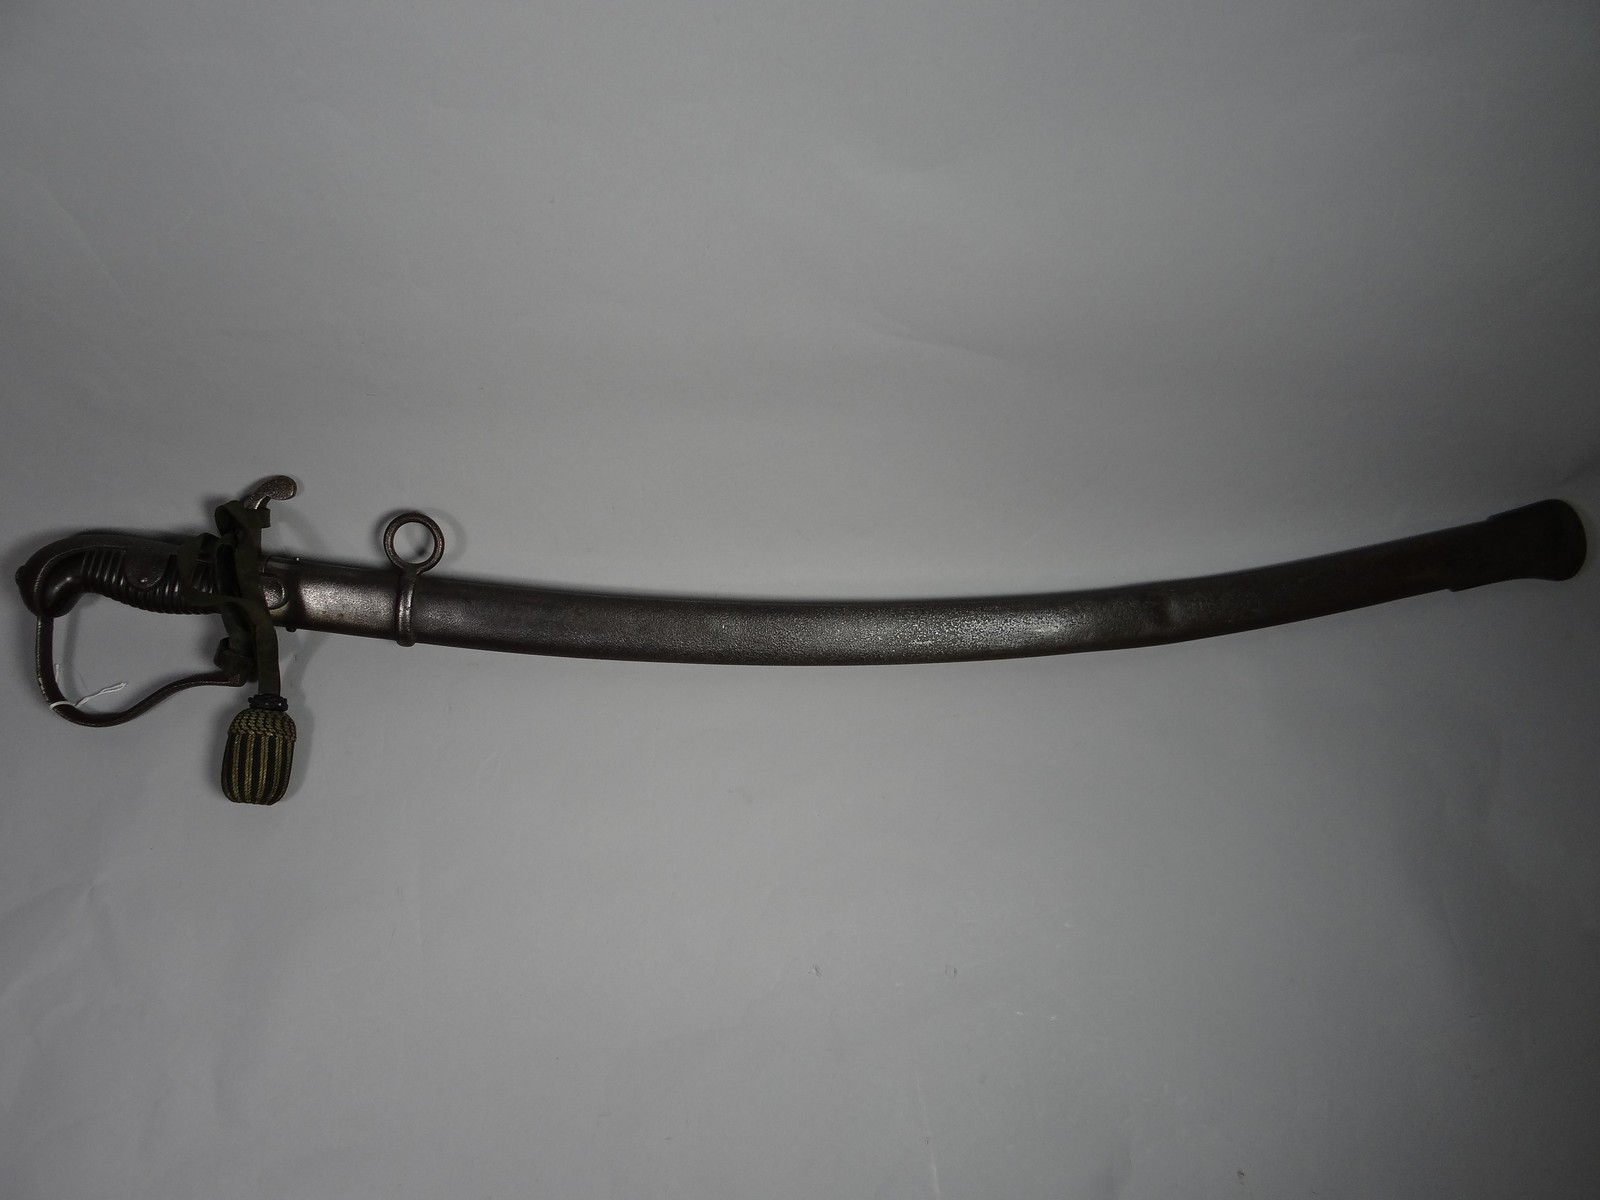 A Prussian heavy cavalry sword in scabbard with portepee knot